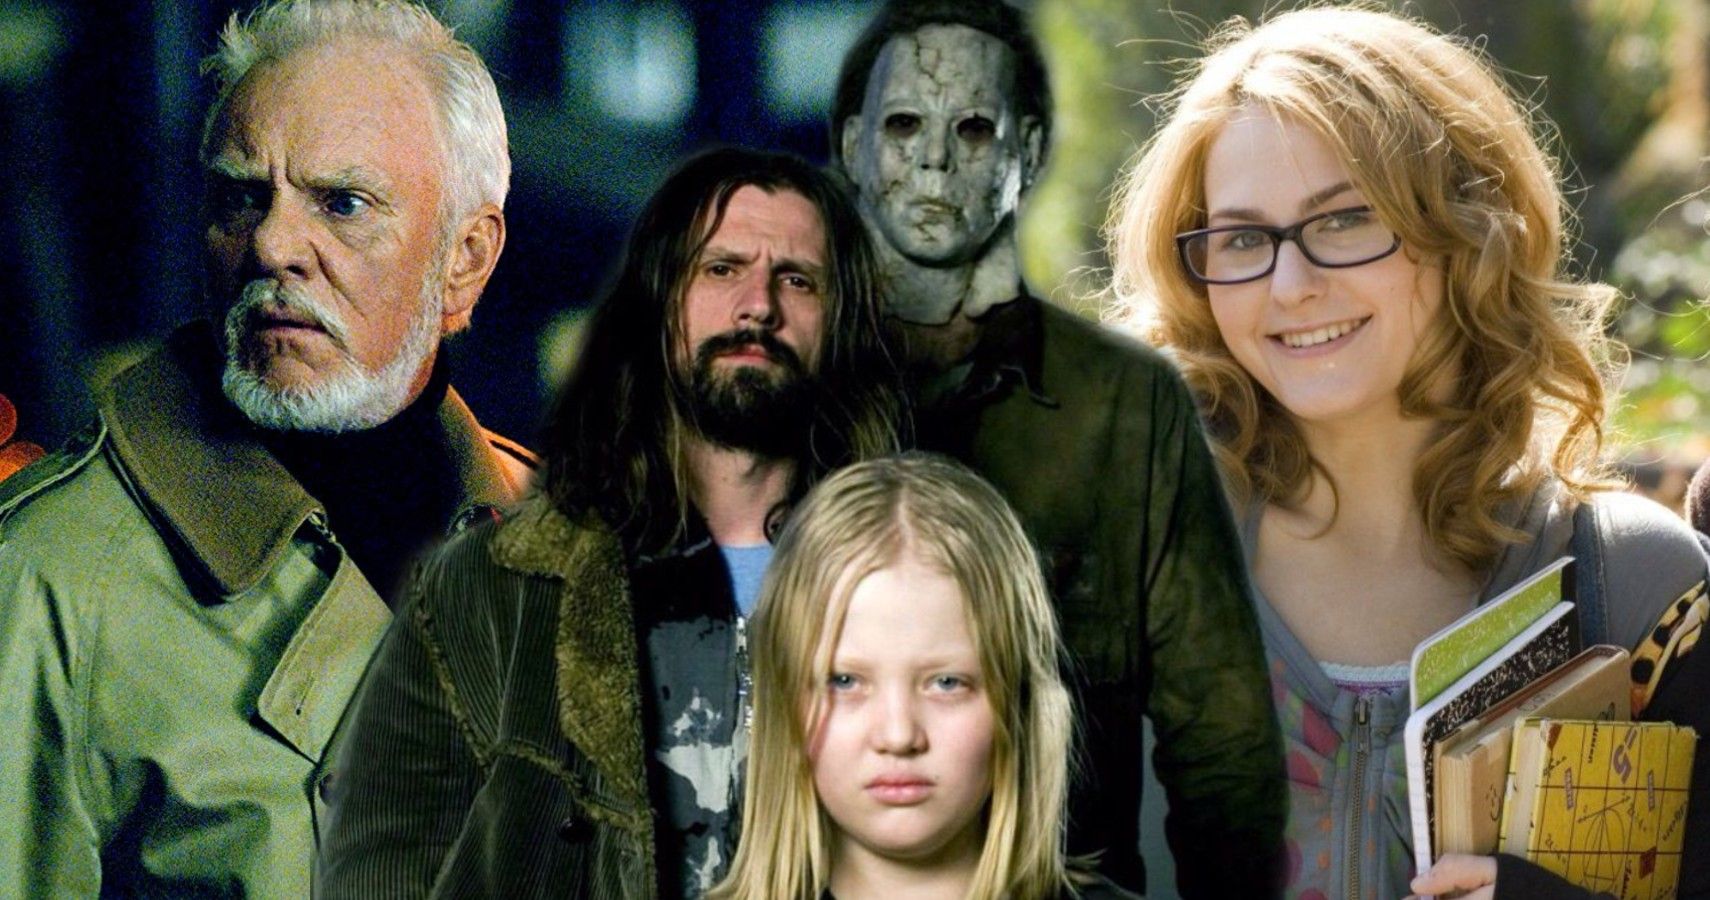 Halloween 5 Things Rob Zombie's Remake Does Well (& 5 It Did Wrong)